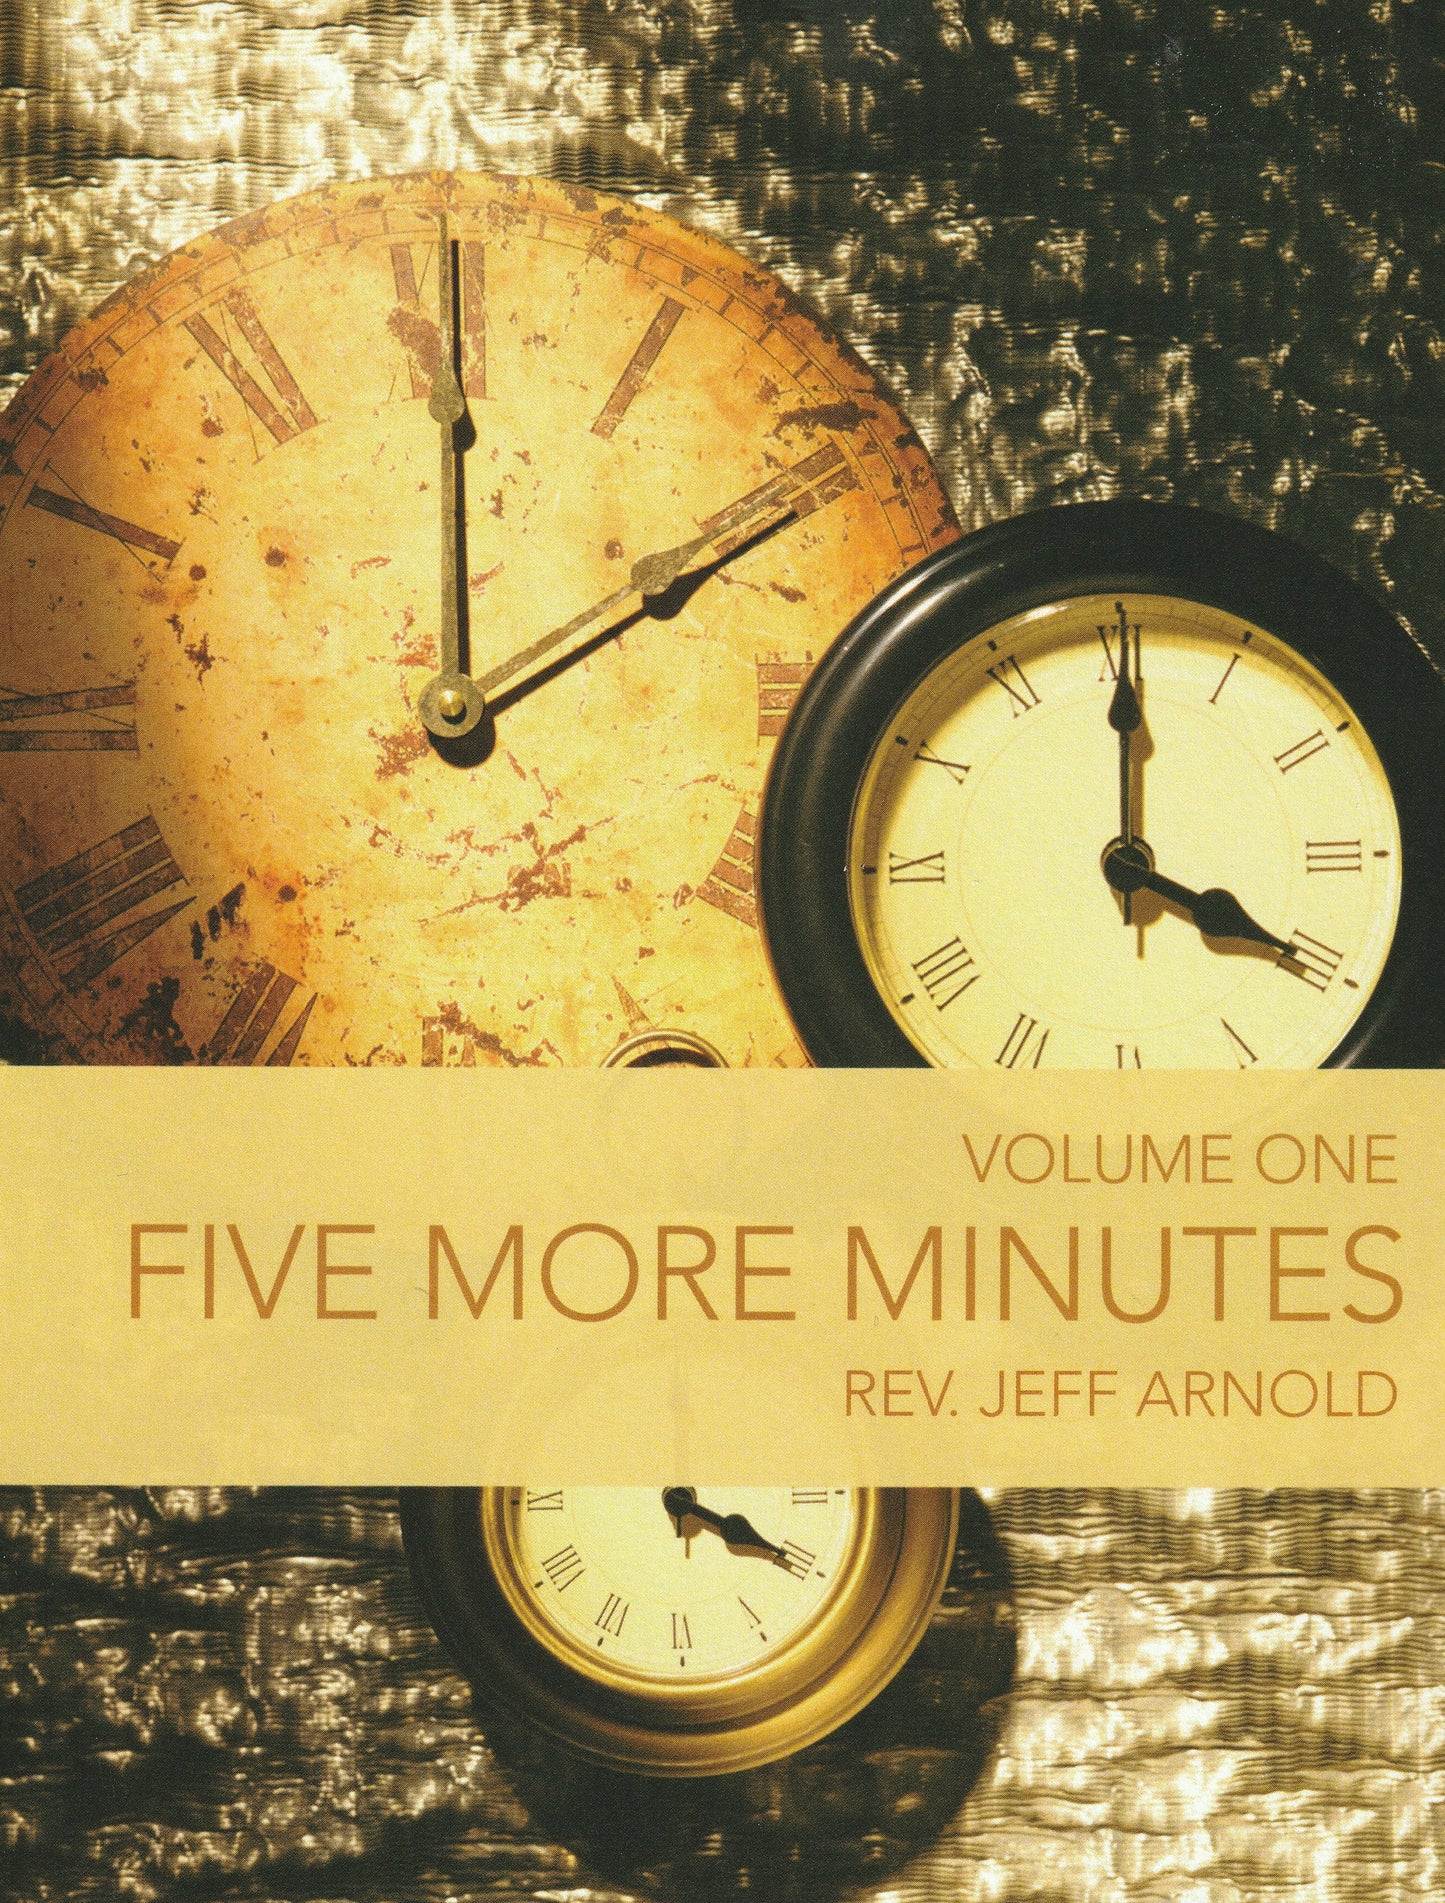 Five More Minutes - Volume One                              (Book $15 - 249 Pages)